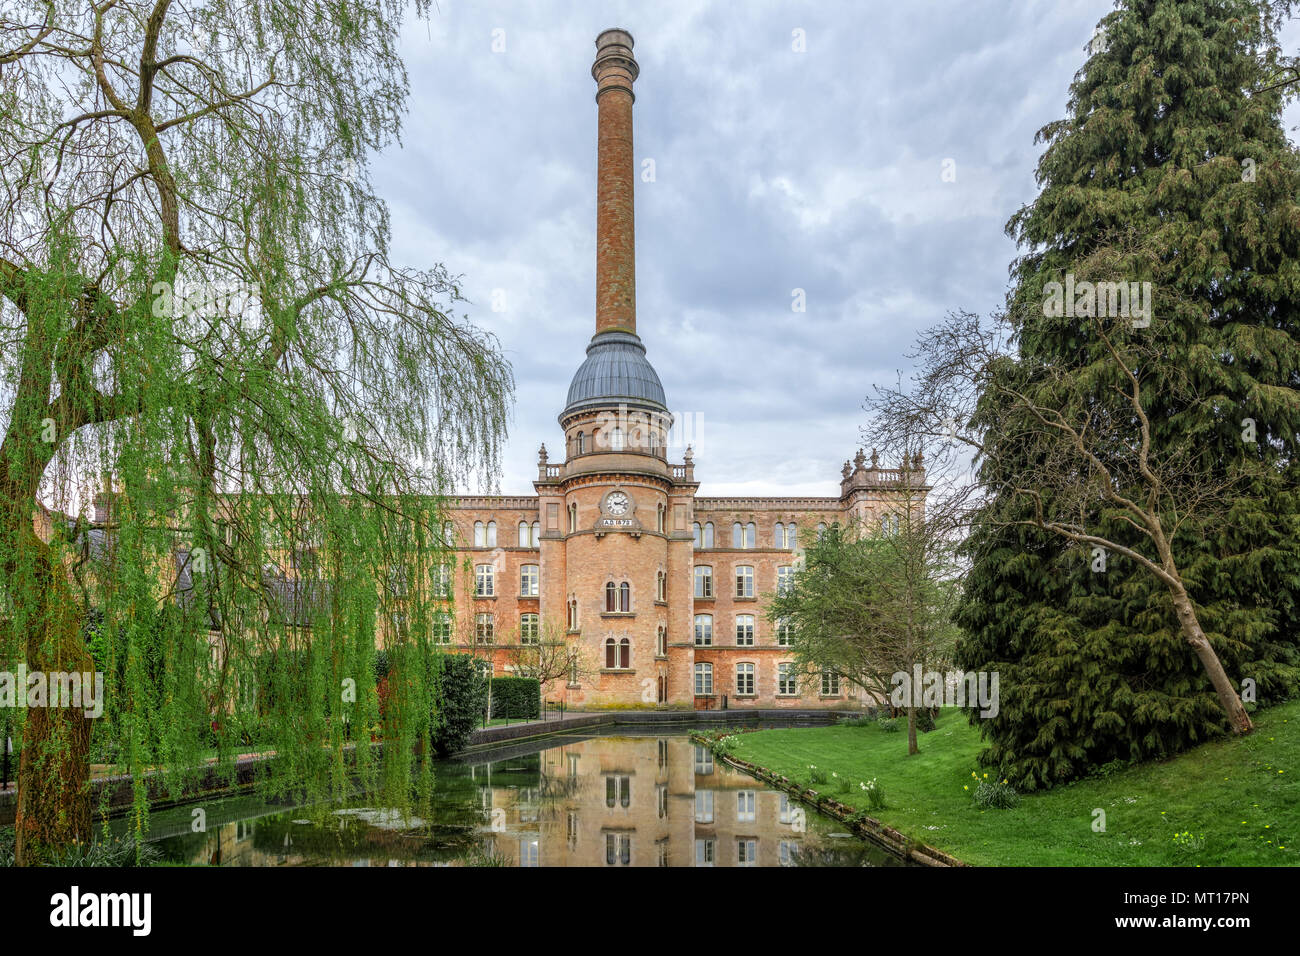 Bliss Tweed Mill, Cotswold, Oxfordshire, England, Regno Unito Foto Stock